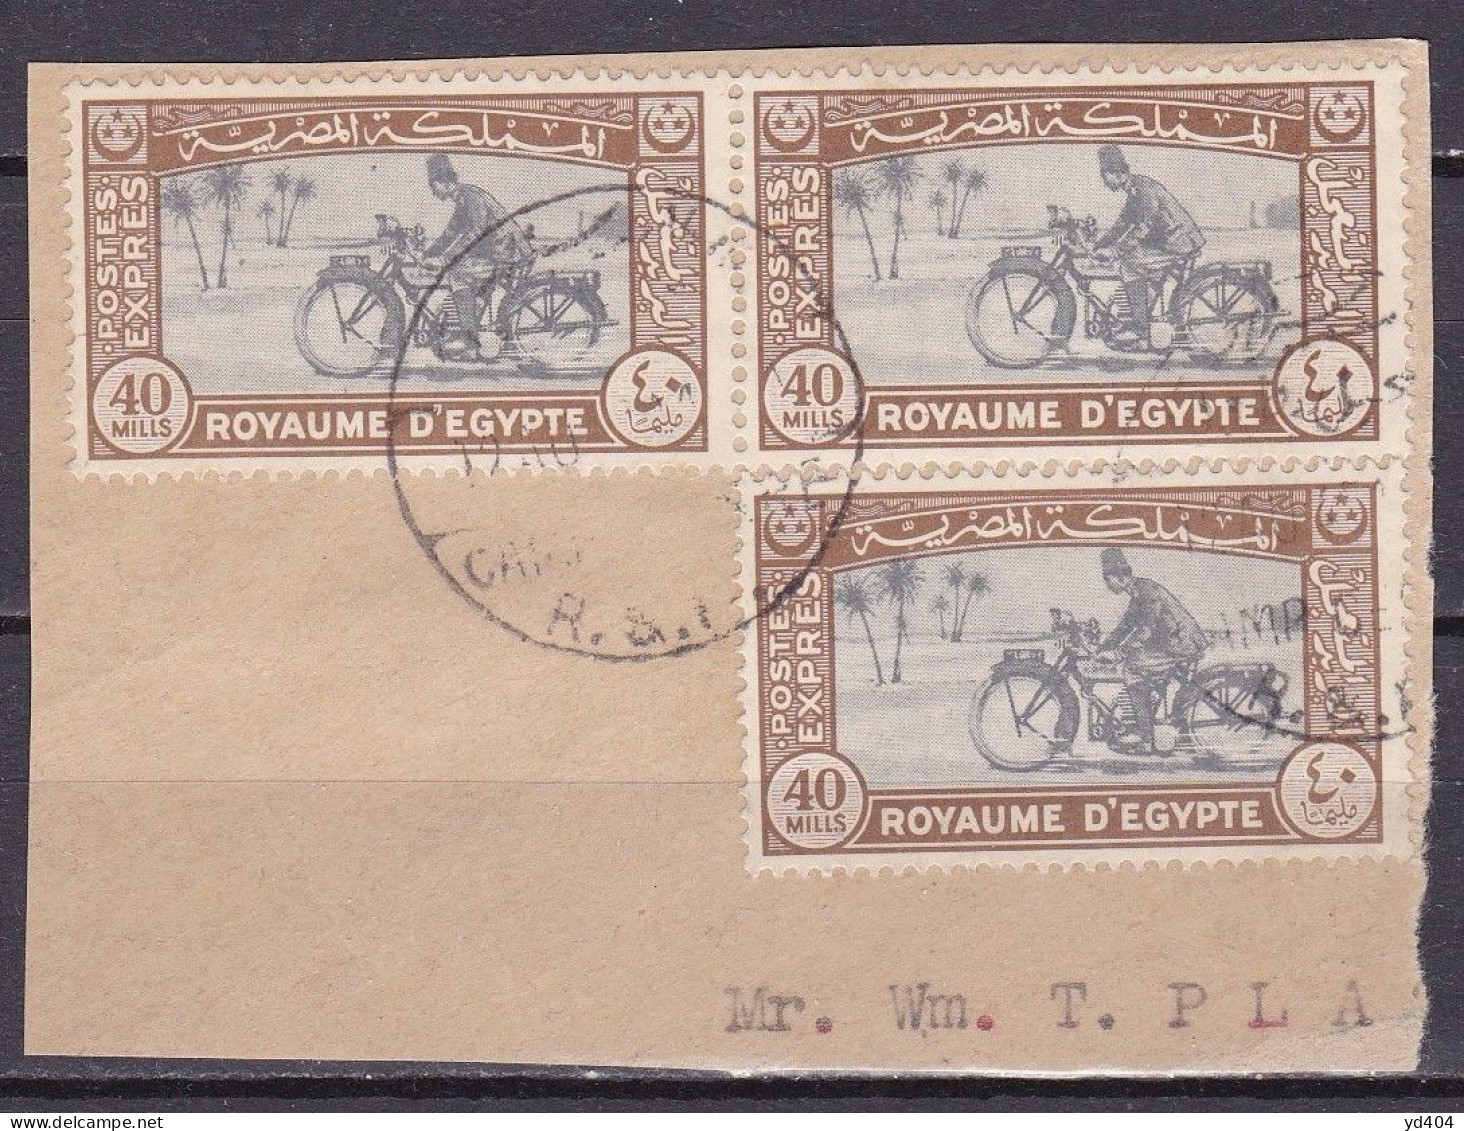 EG908 – EGYPTE – EGYPT – EXPRESS – 1944 – MOTORCYCLE POSTMAN – Y&T # 4(x3) USED 18 € - Used Stamps